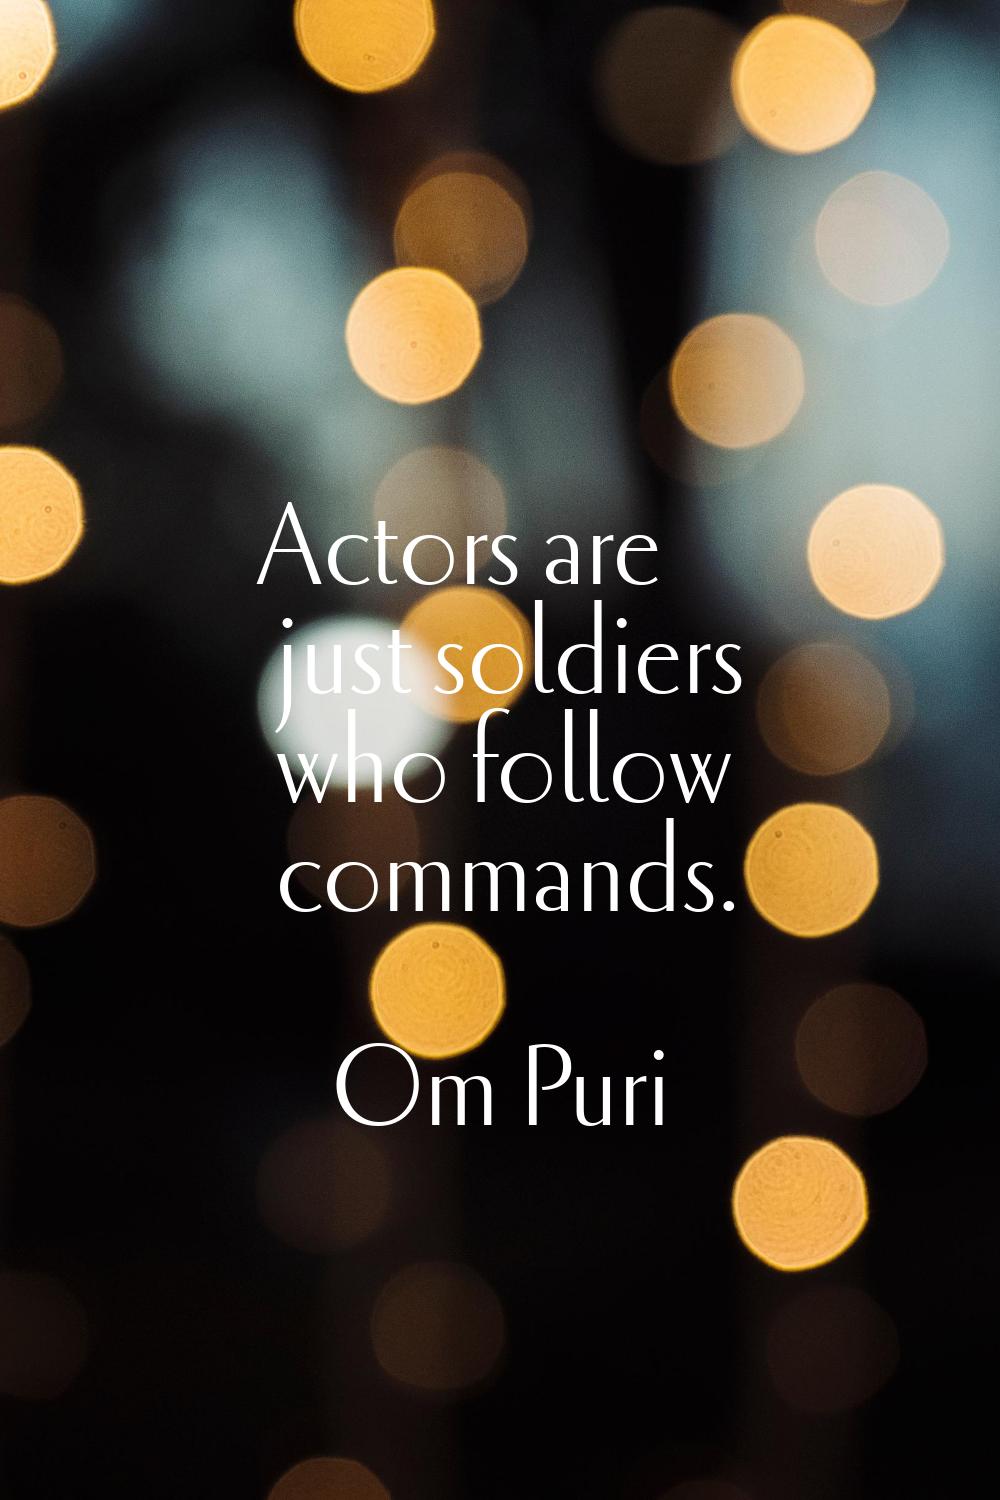 Actors are just soldiers who follow commands.